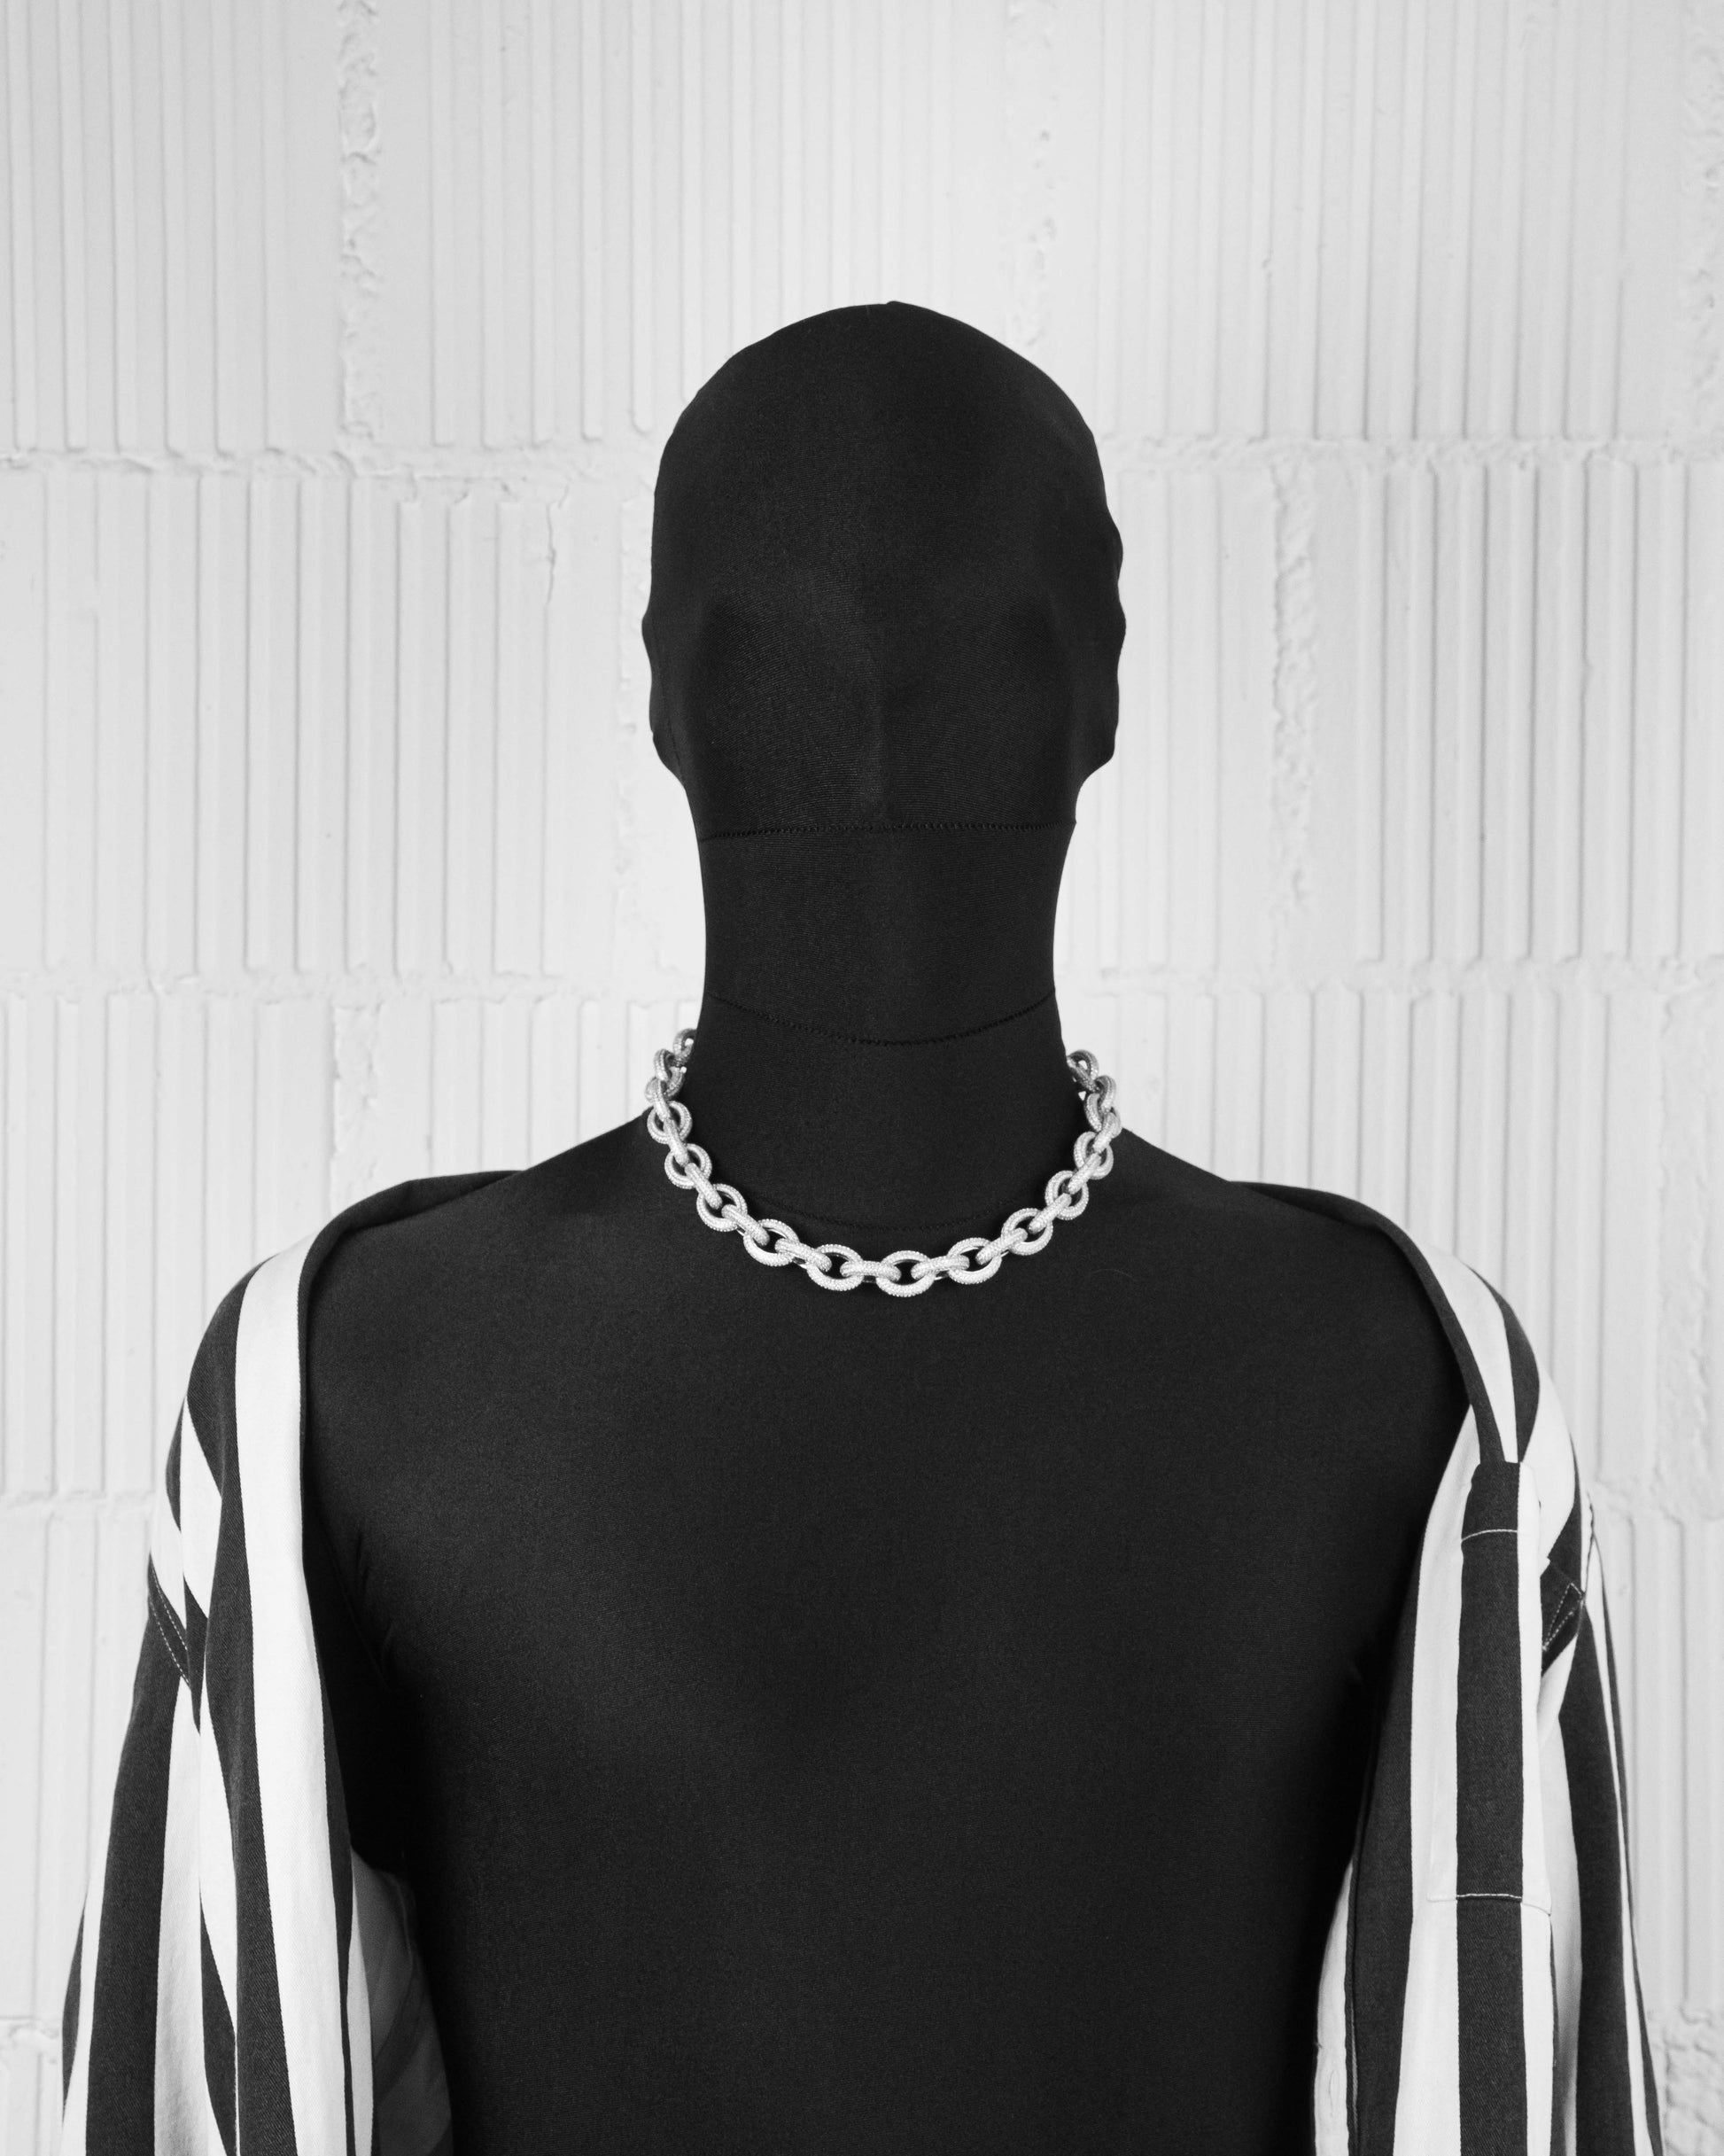 man with black suit wearing 18k white gold coated oversize rolo necklace with all around hand-set micropavé stones in white